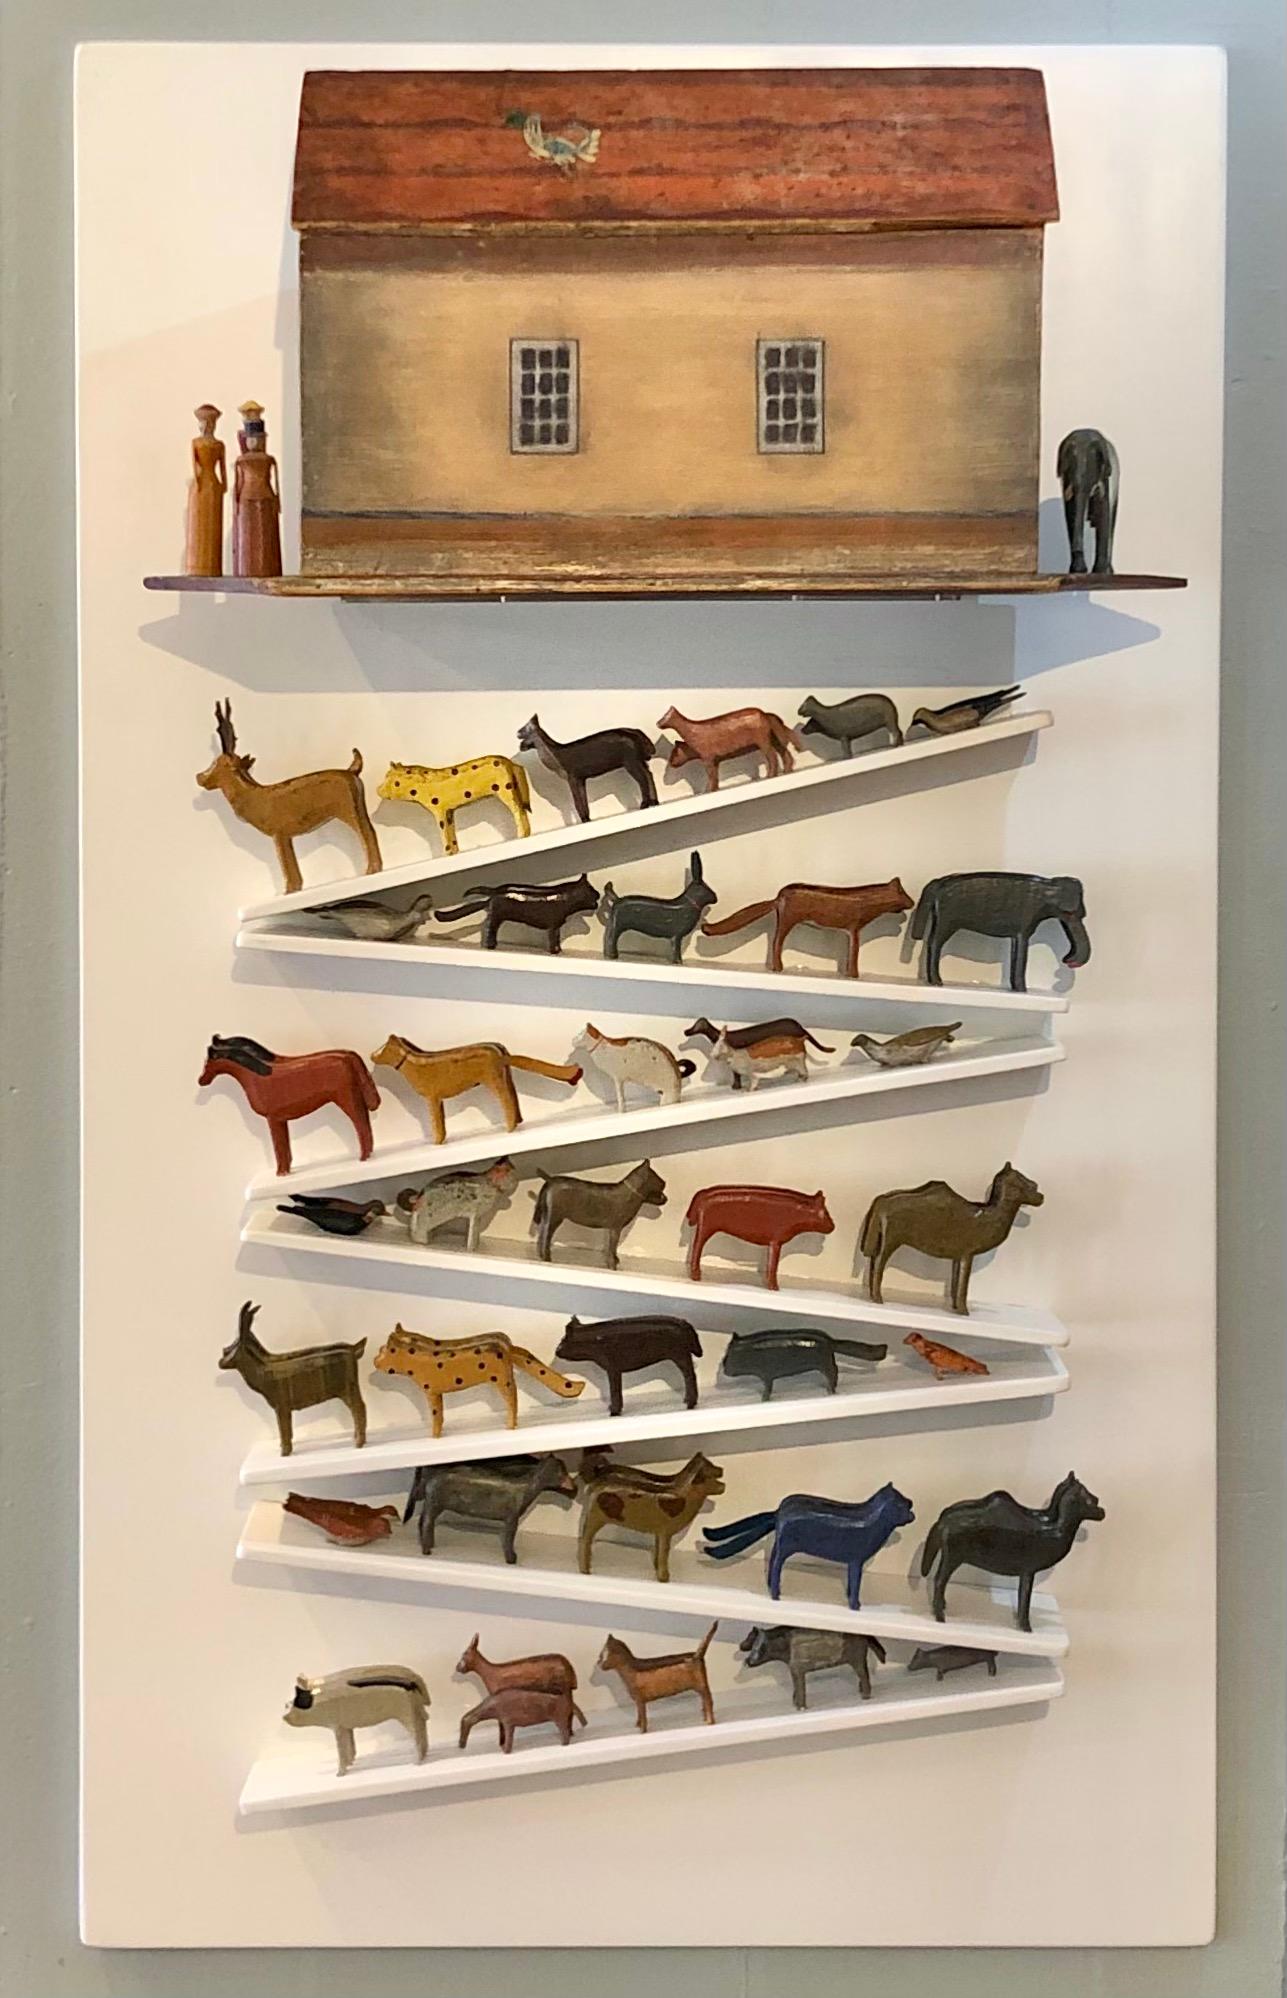 Made in the 19th and early 20th century in Erzgebirge Germany. This example is from the 19th century and displayed on a custom wall mount that gives it a contemporary art feel. The ark measures 20.5